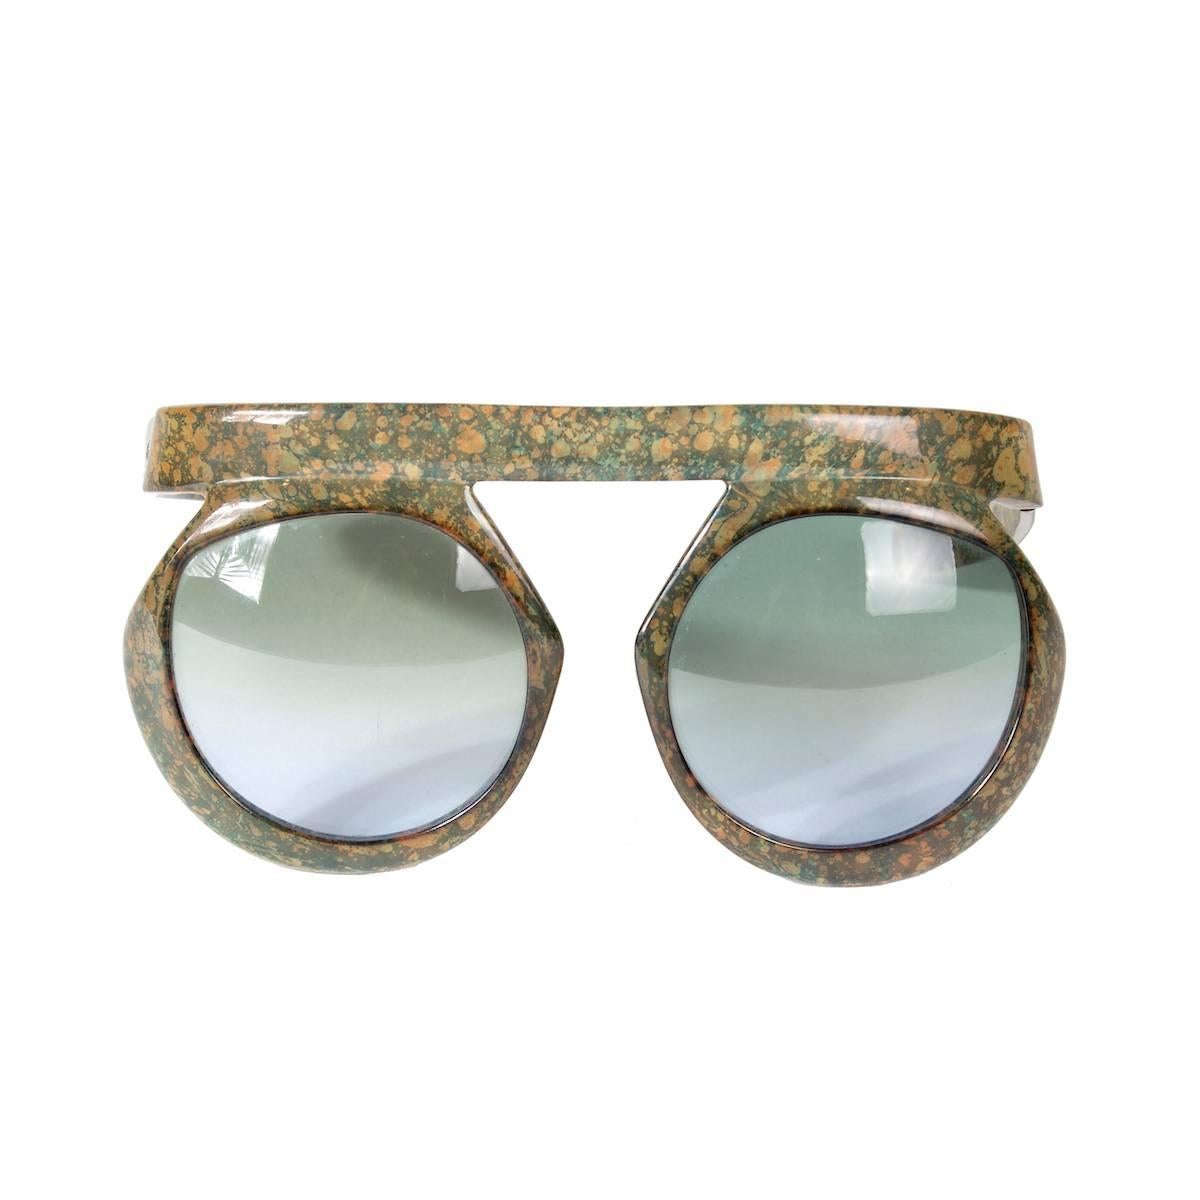 These are a pair of sunglasses by Christian Dior from the 1970s.  They are called the 